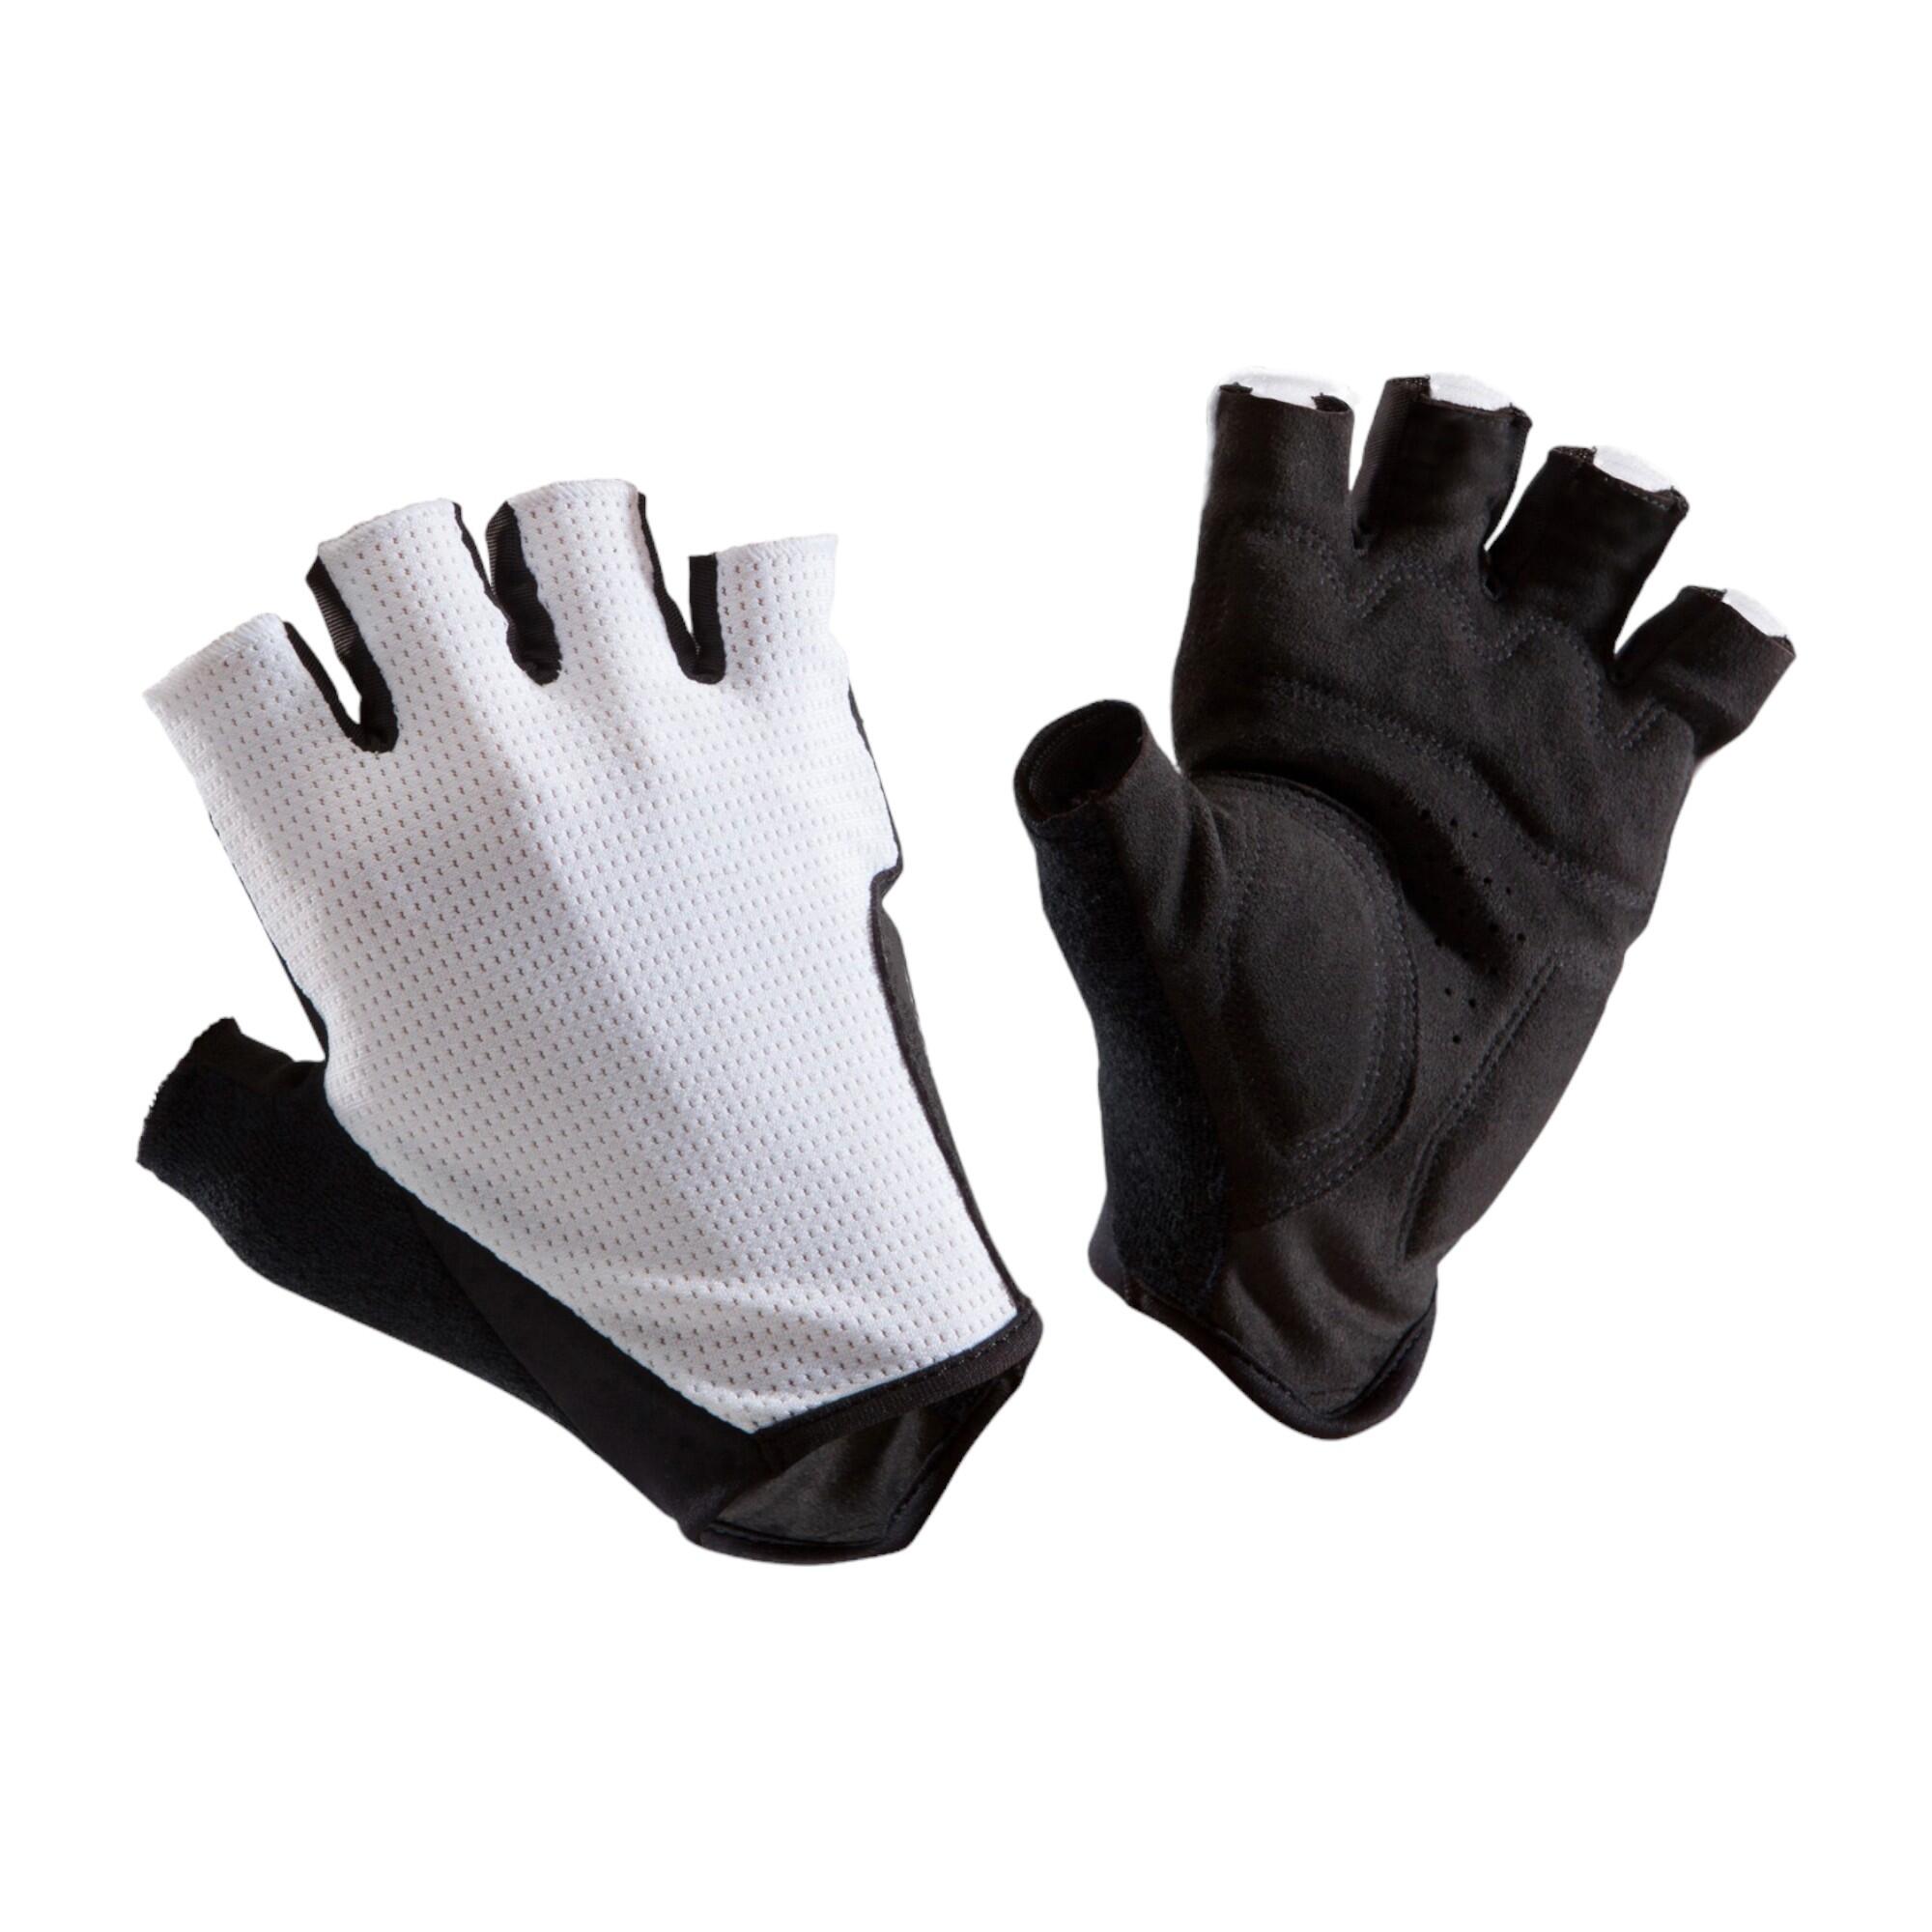 Road Cycling Gloves